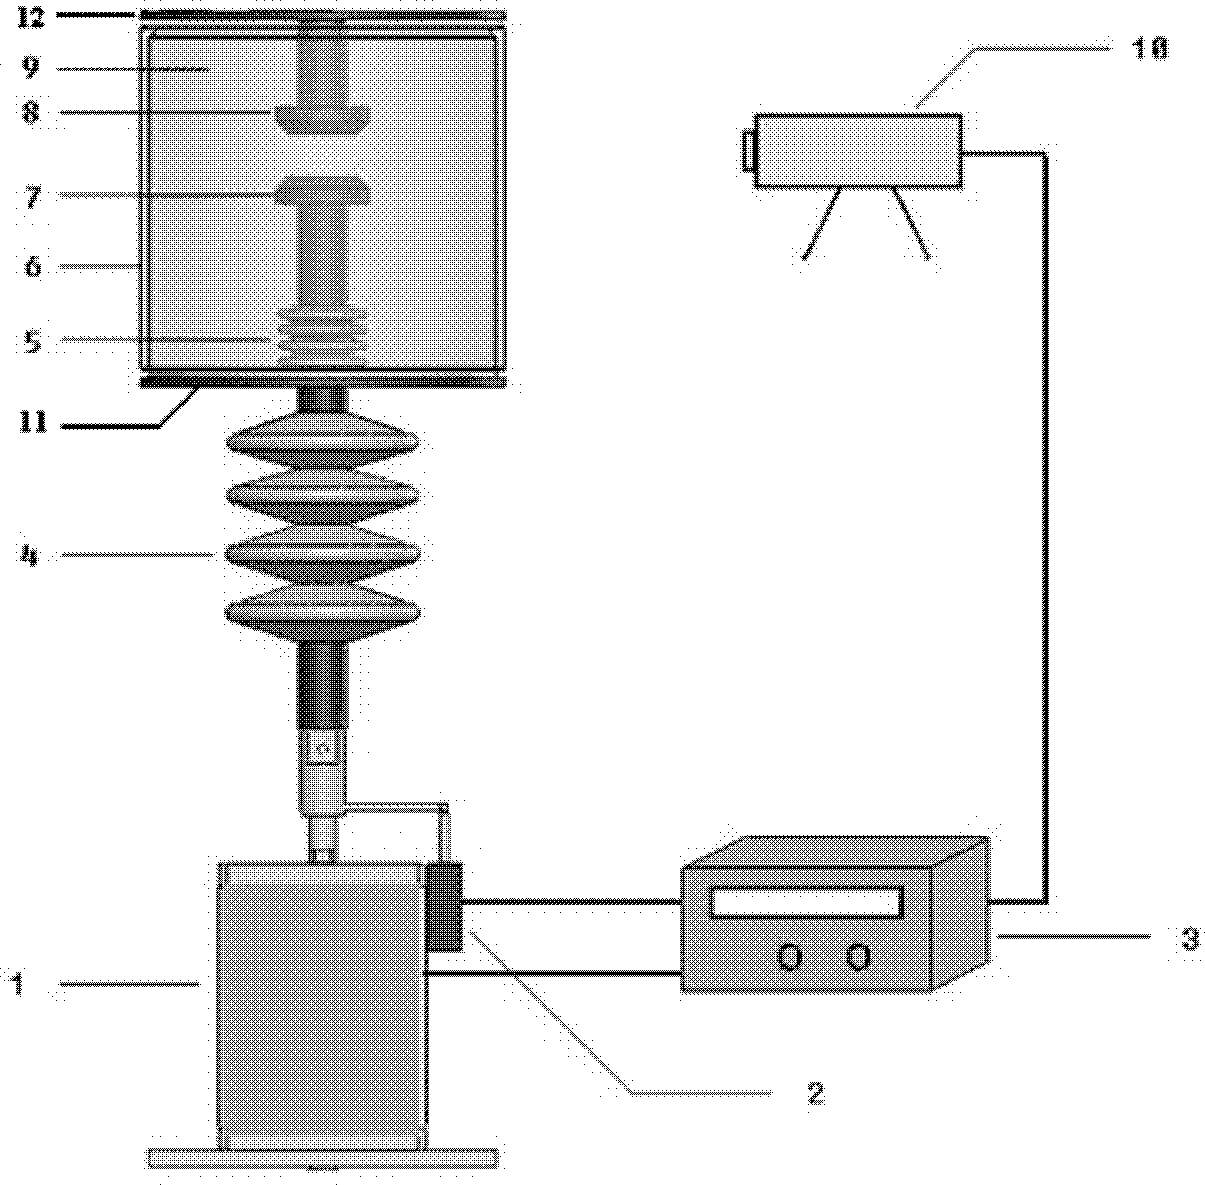 Vacuum arc observation apparatus capable of being operated with adjustable speed